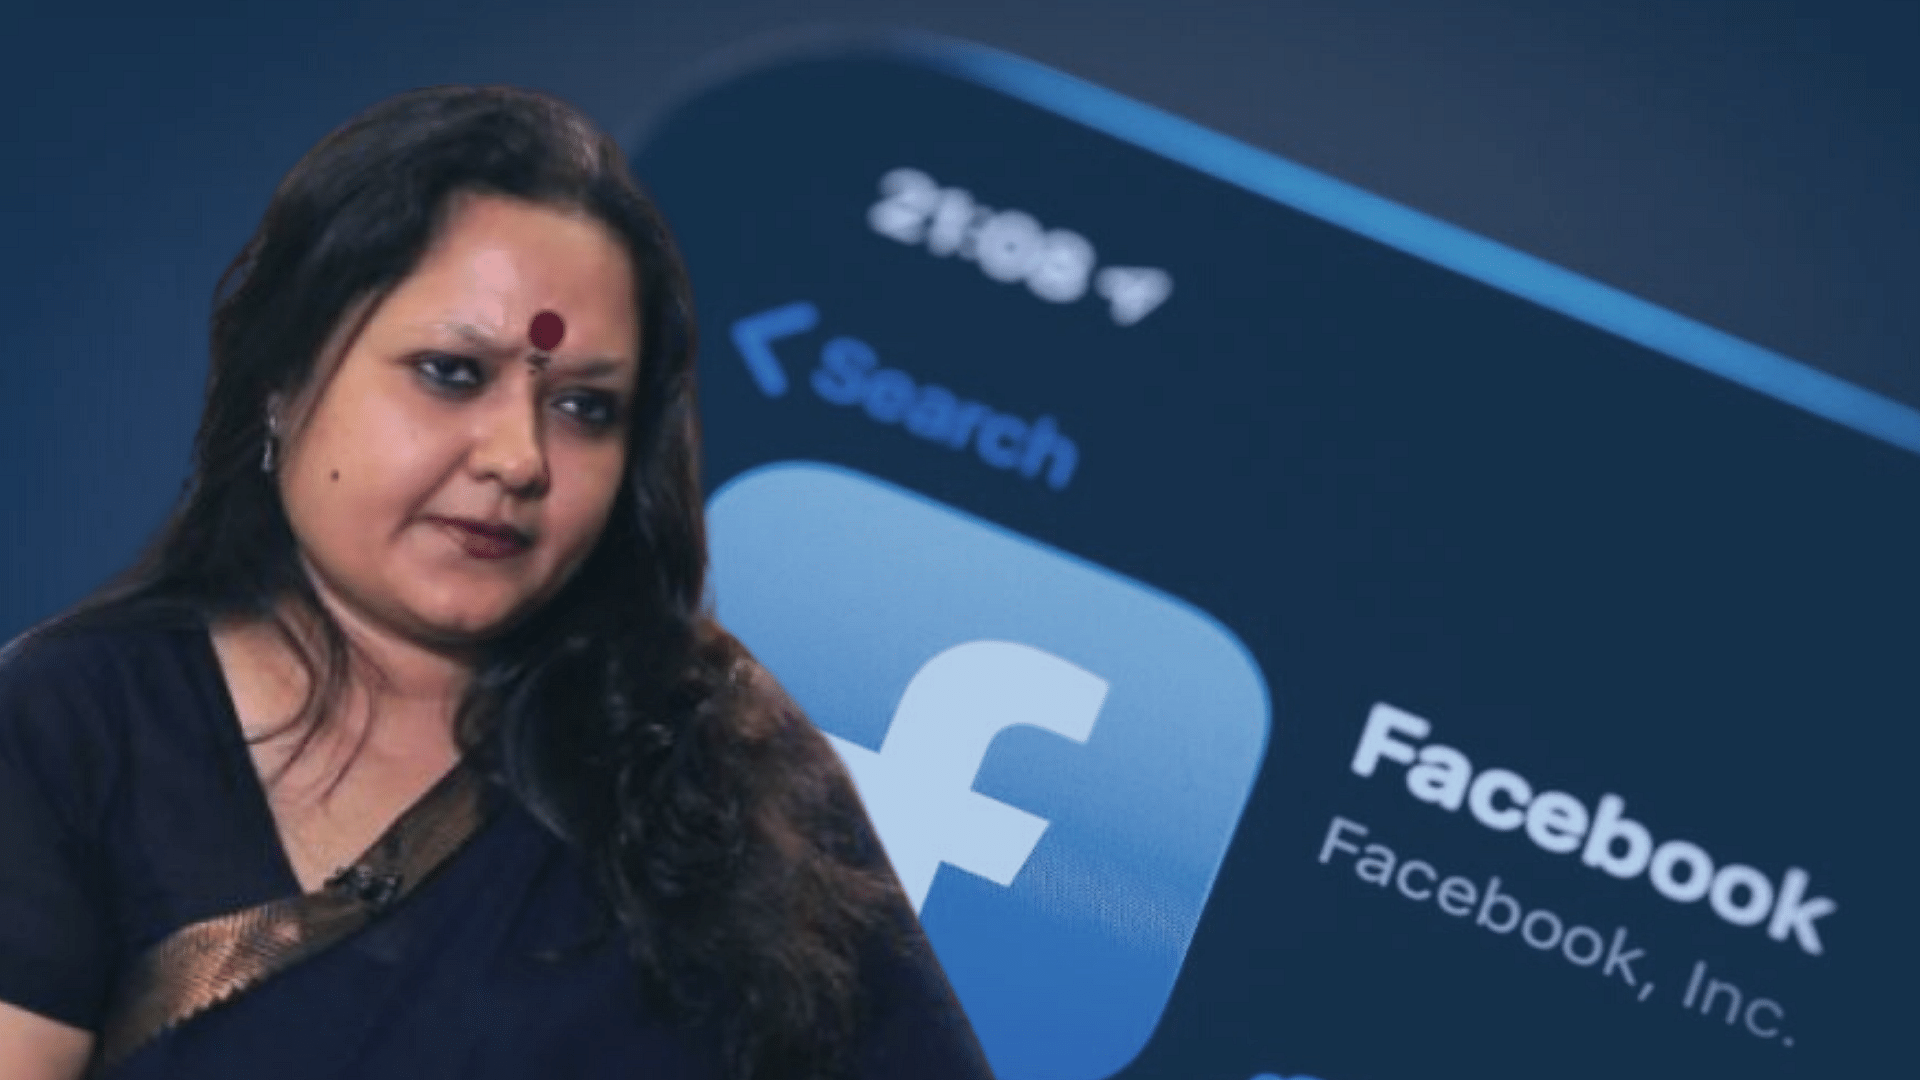 Raipur Police registered an FIR against Ankhi Das Facebook’s public policy director in India, on a slew of charges under the Indian Penal Code, including outraging religious feelings and incitement to violence.